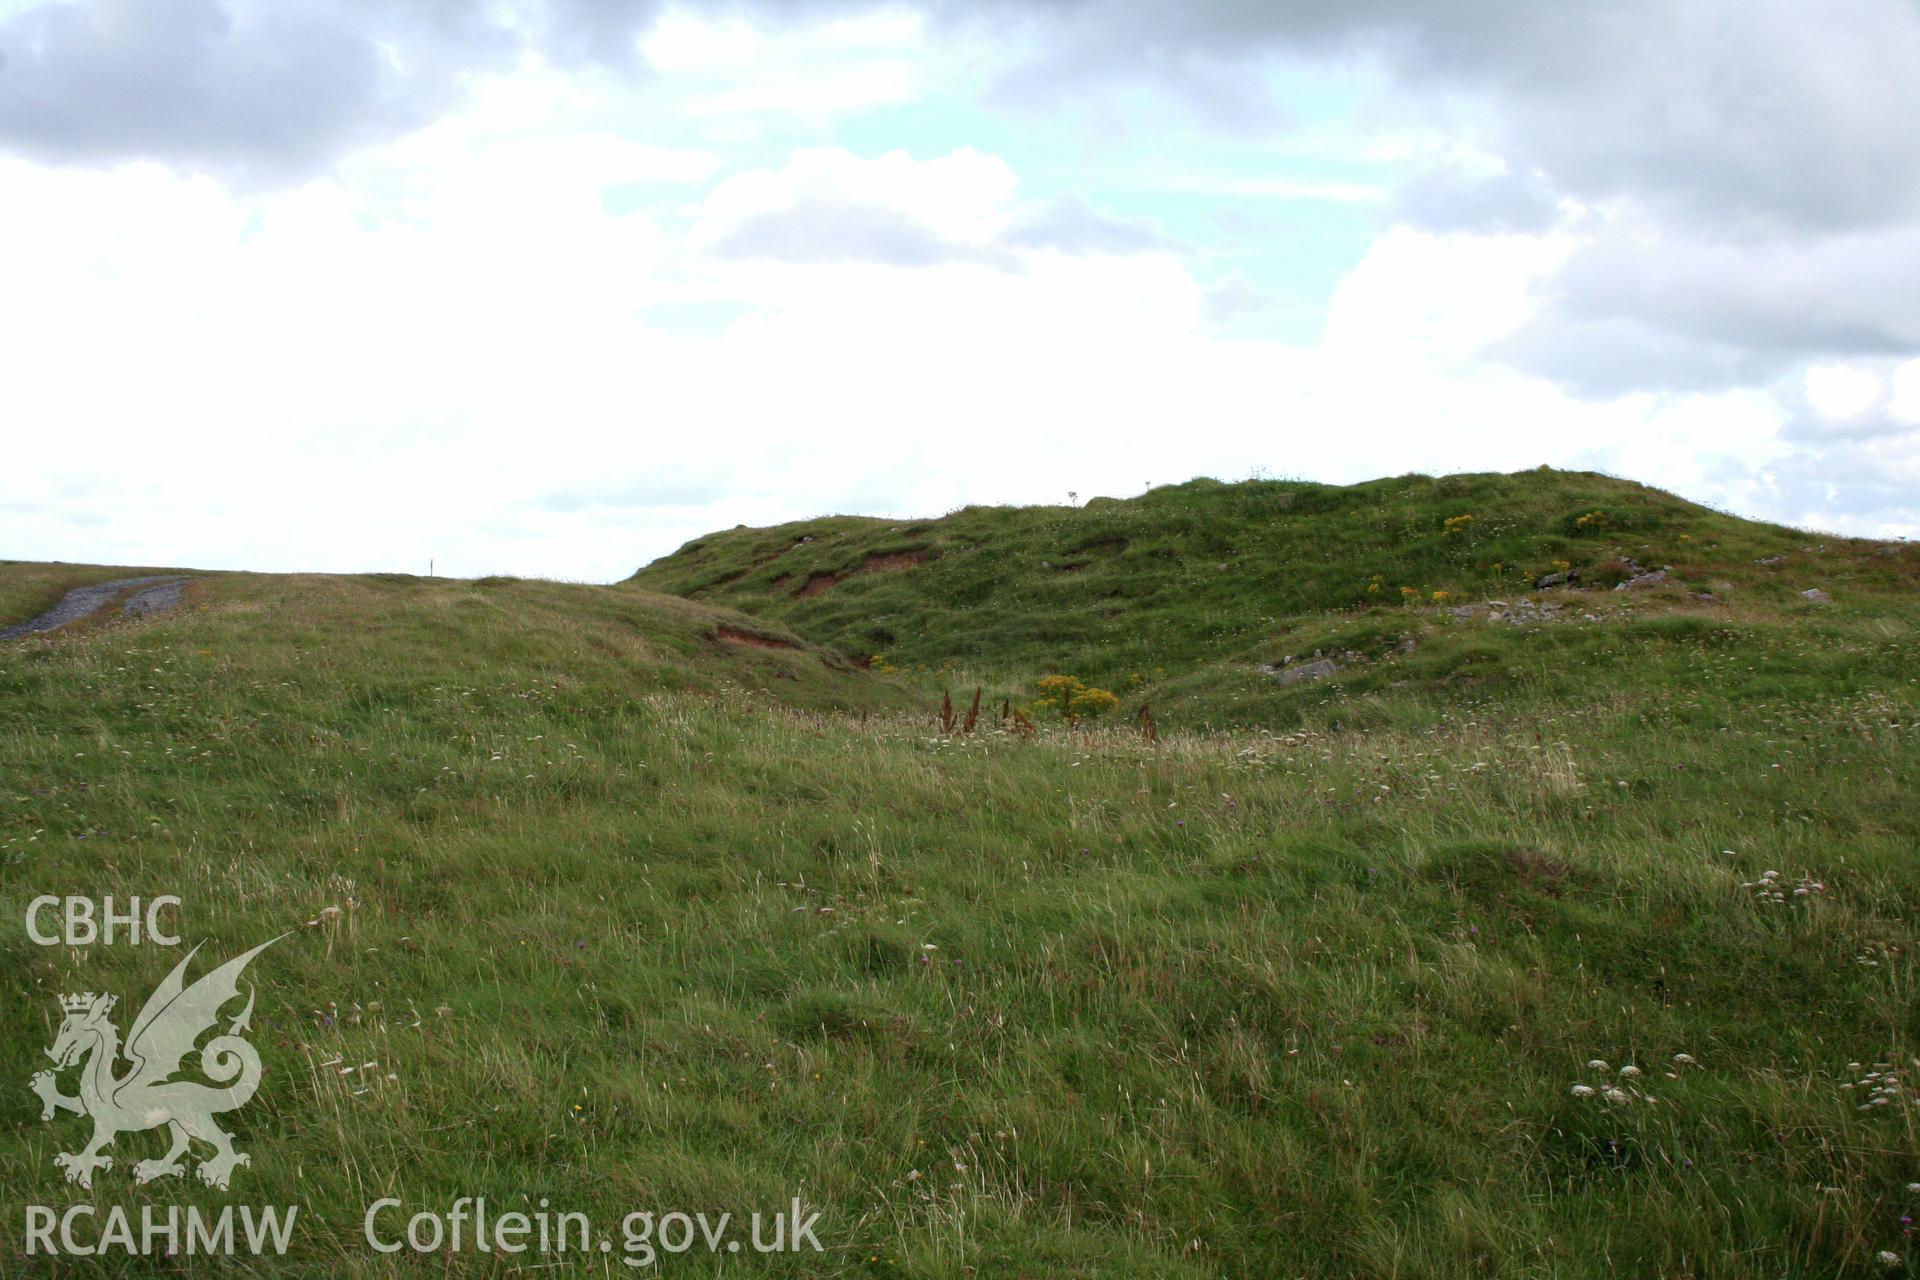 Looking south-east to the section of ditch defining the entrance forecourt to the fort.